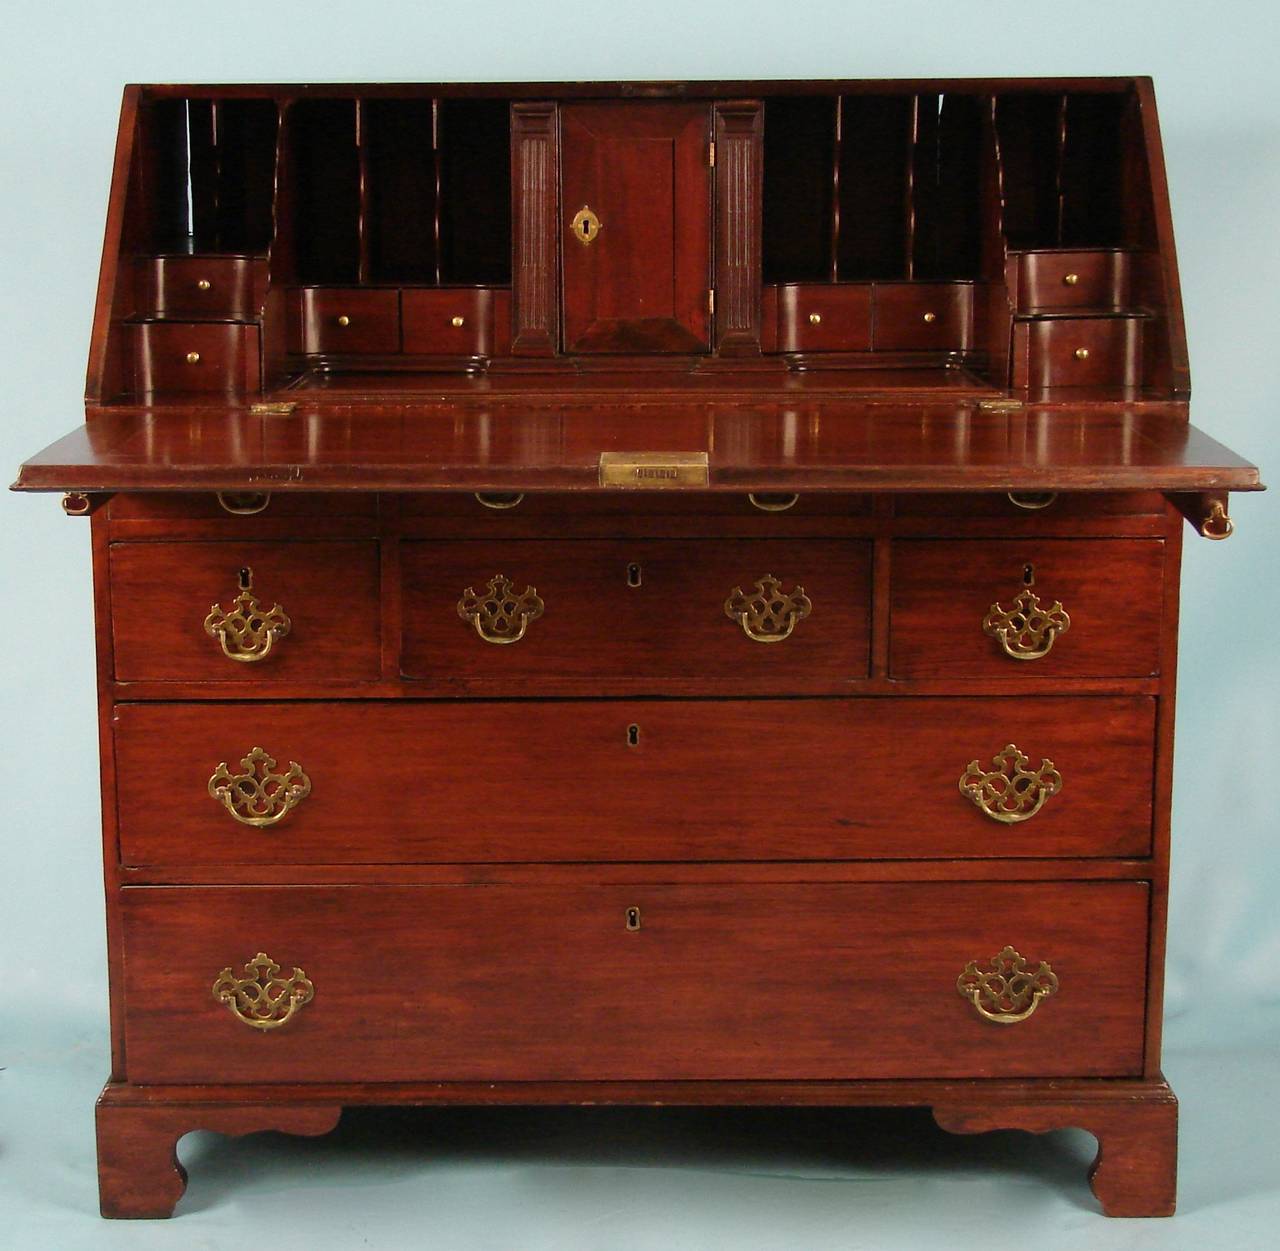 A good quality English Chippendale period mahogany slant front desk, the well-fitted and shaped interior above three short and two long drawers supported on bracket feet, circa 1770.